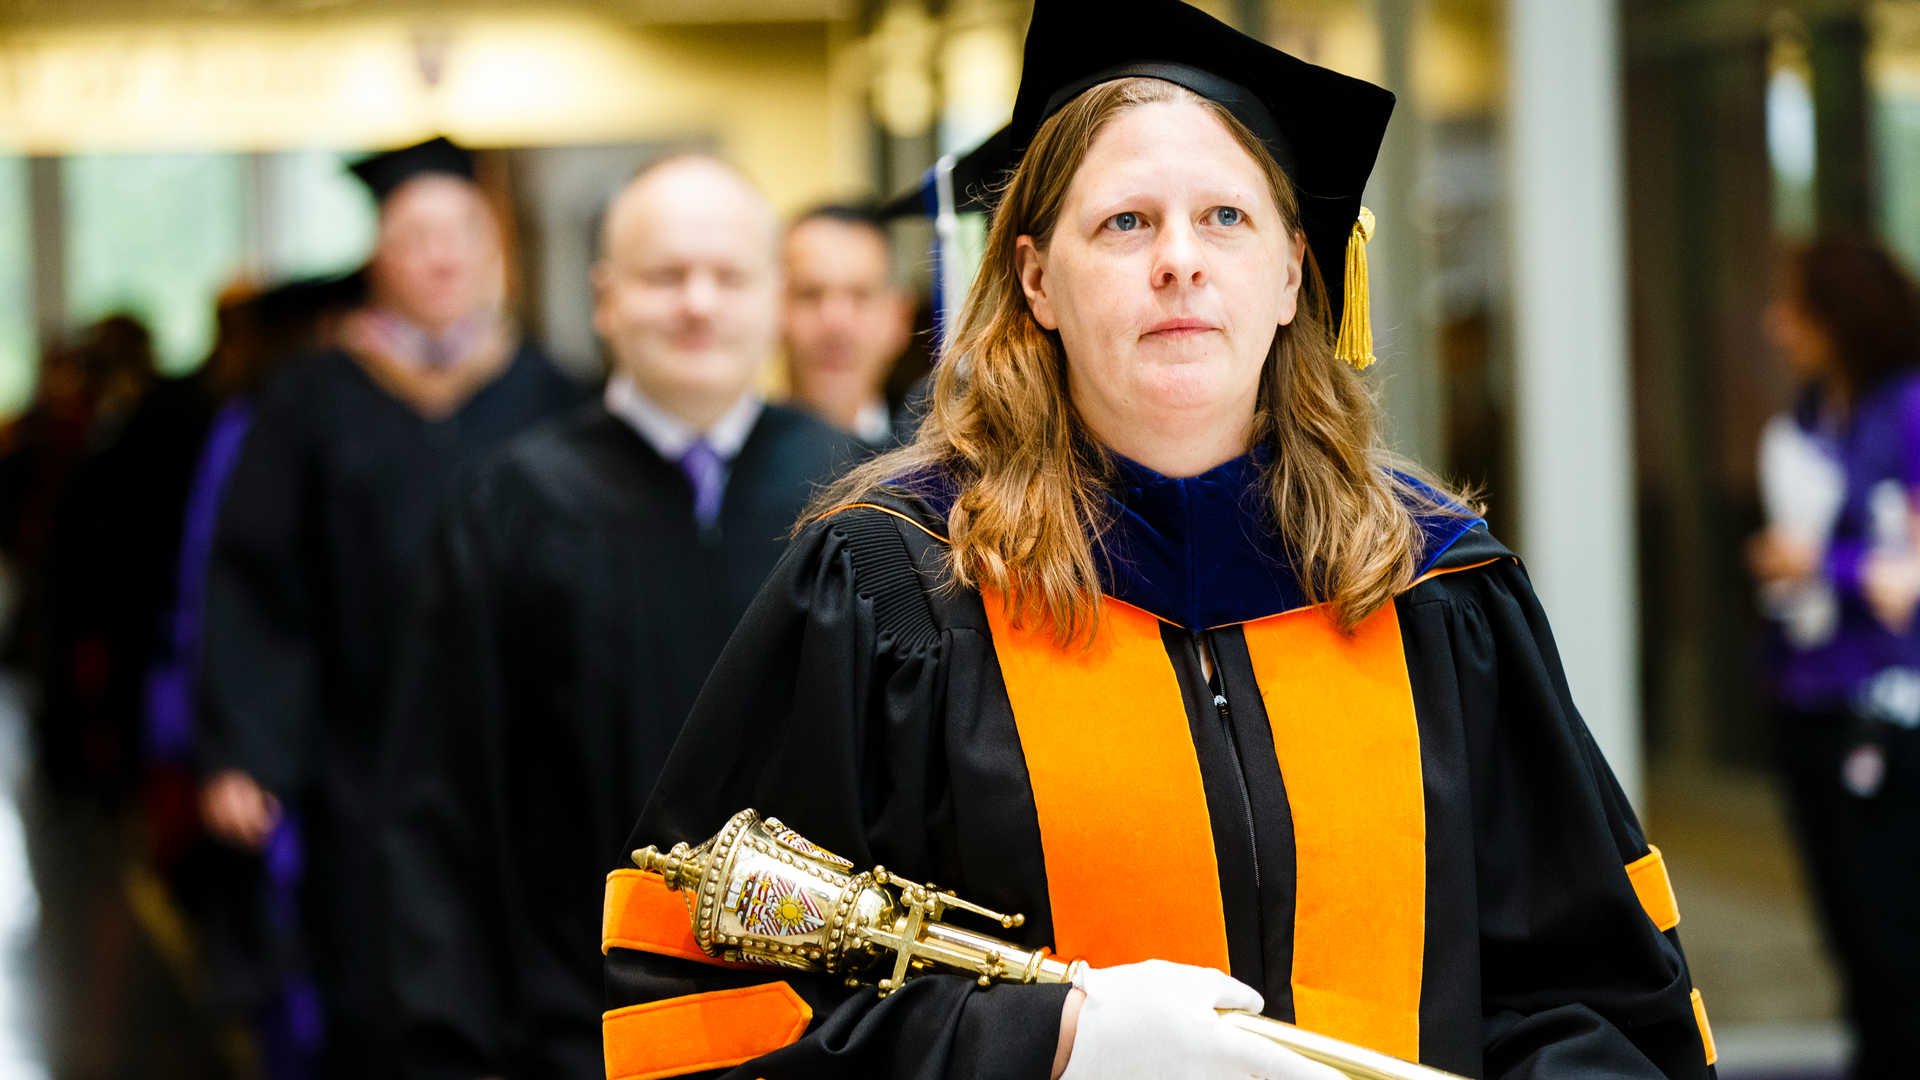 Professor Kris Wammer carries the mace during commencement